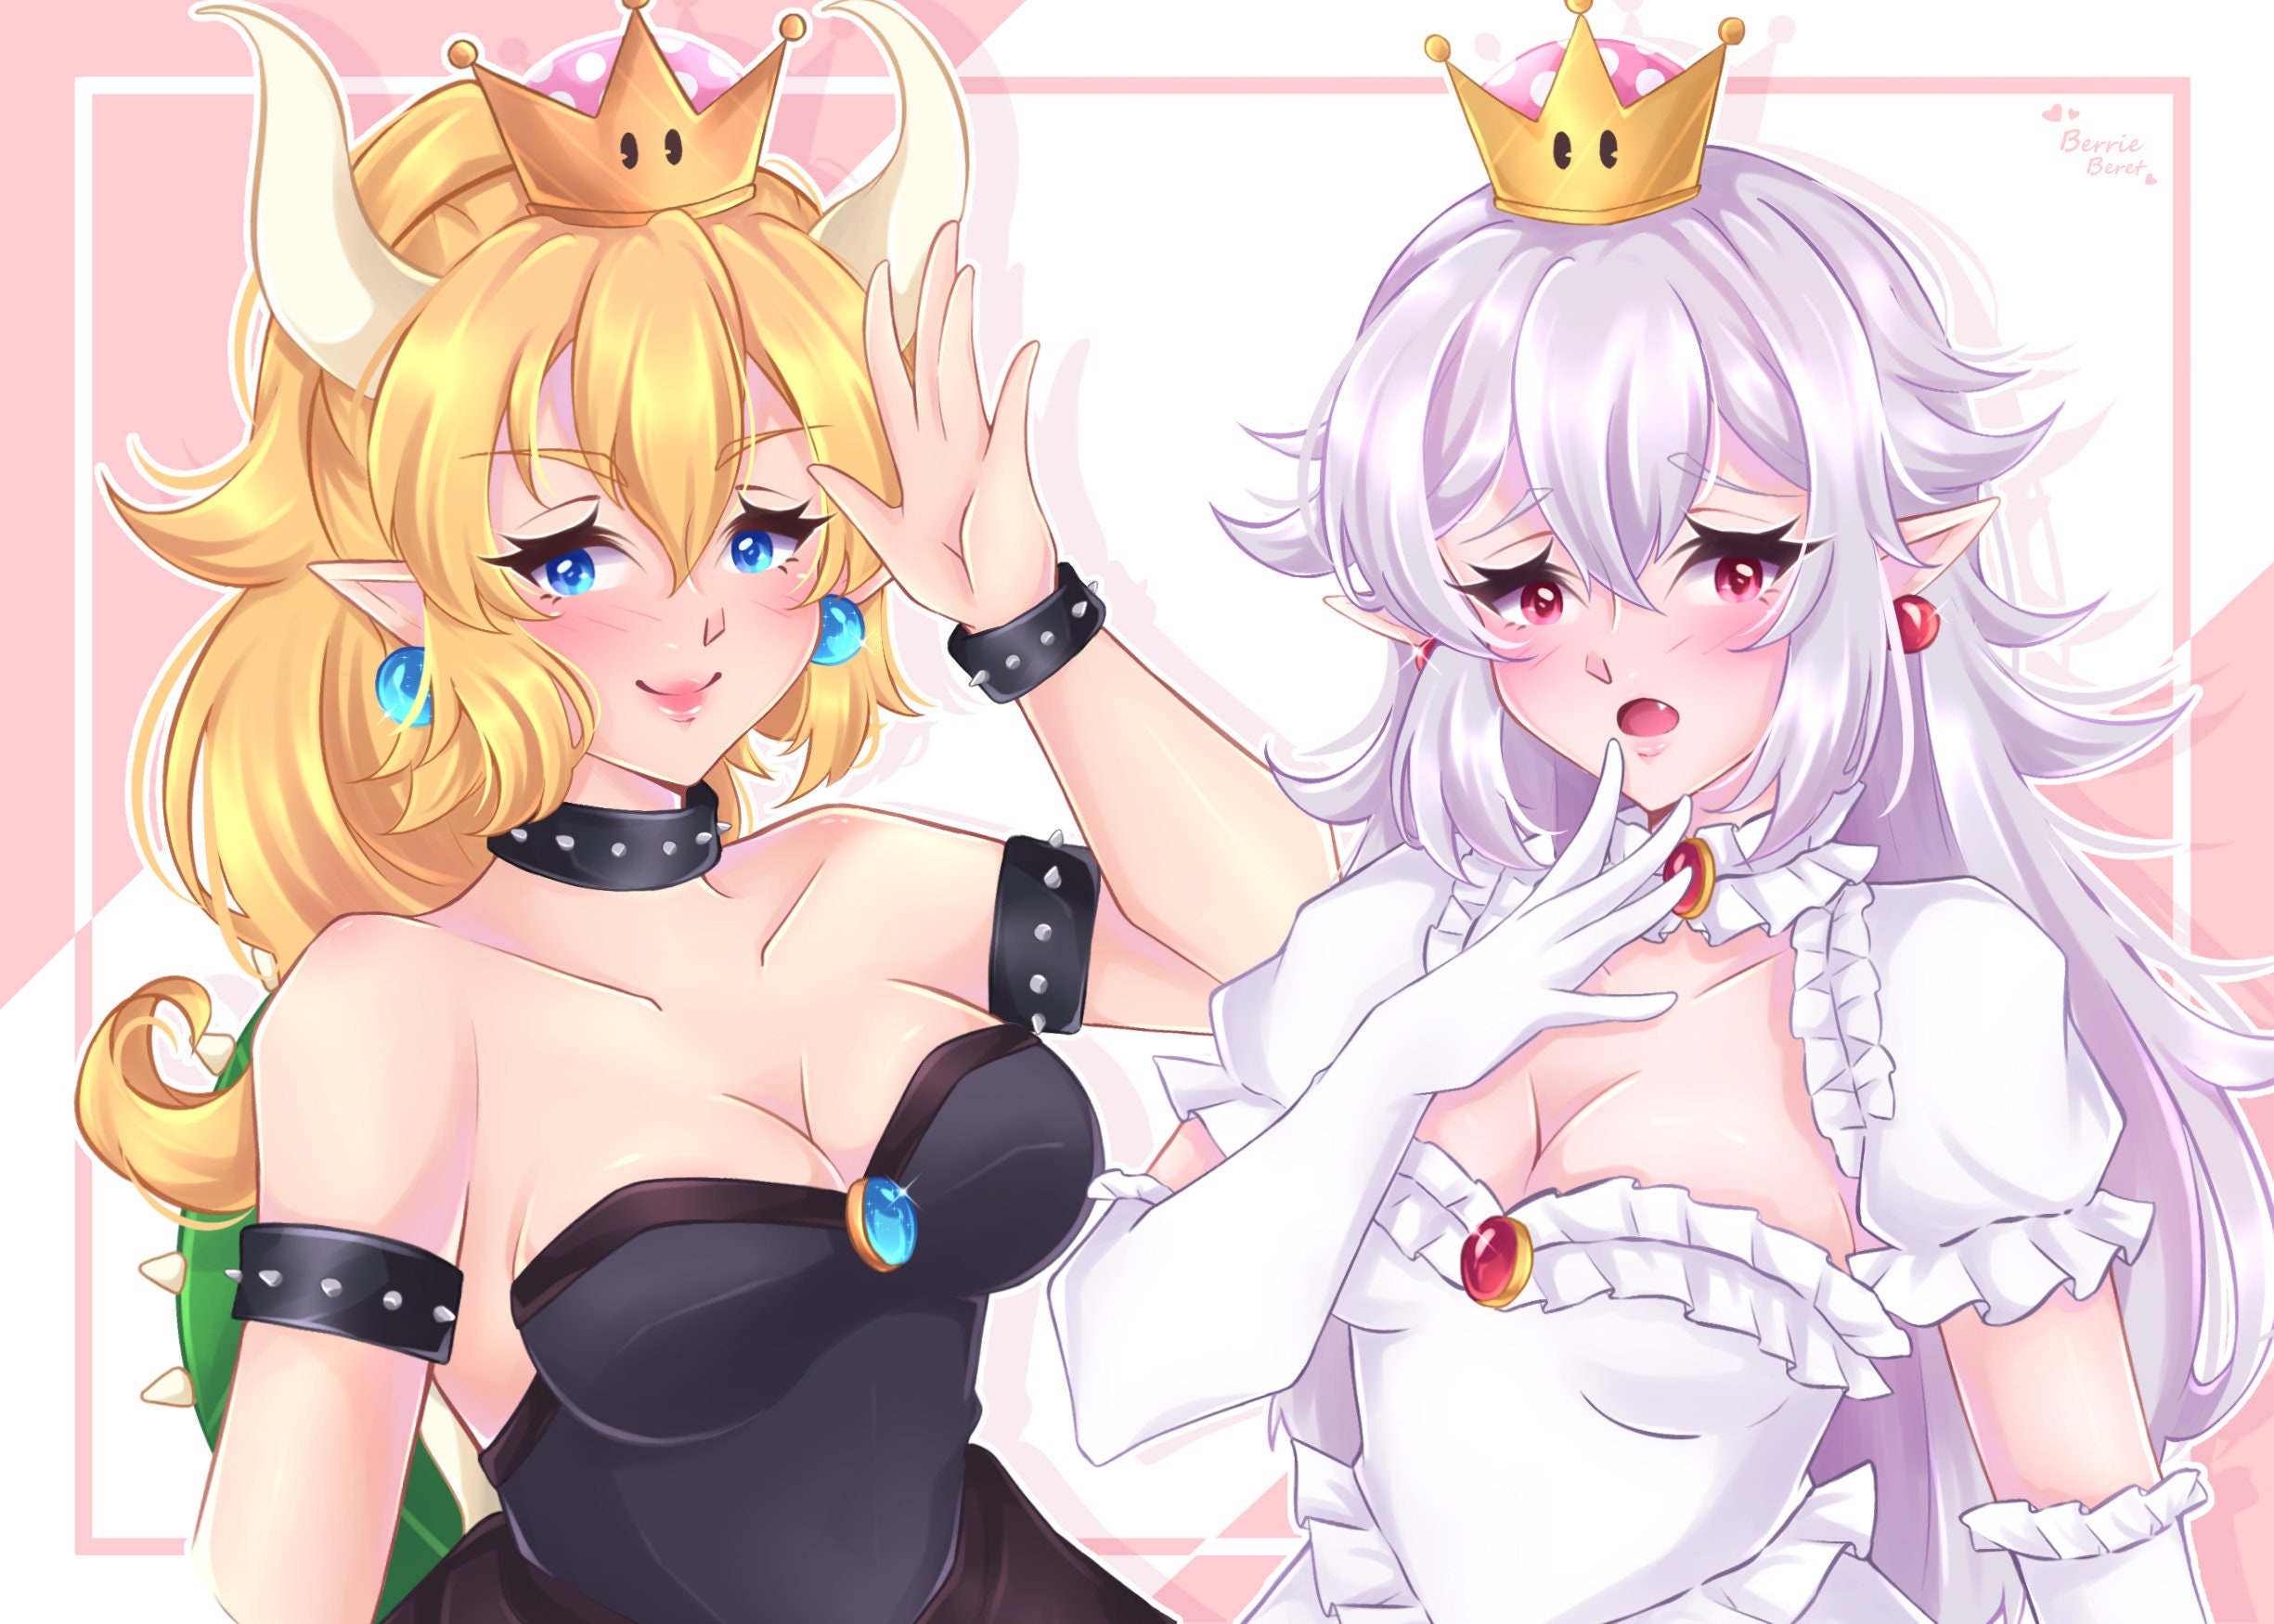 Boosette and bowsette